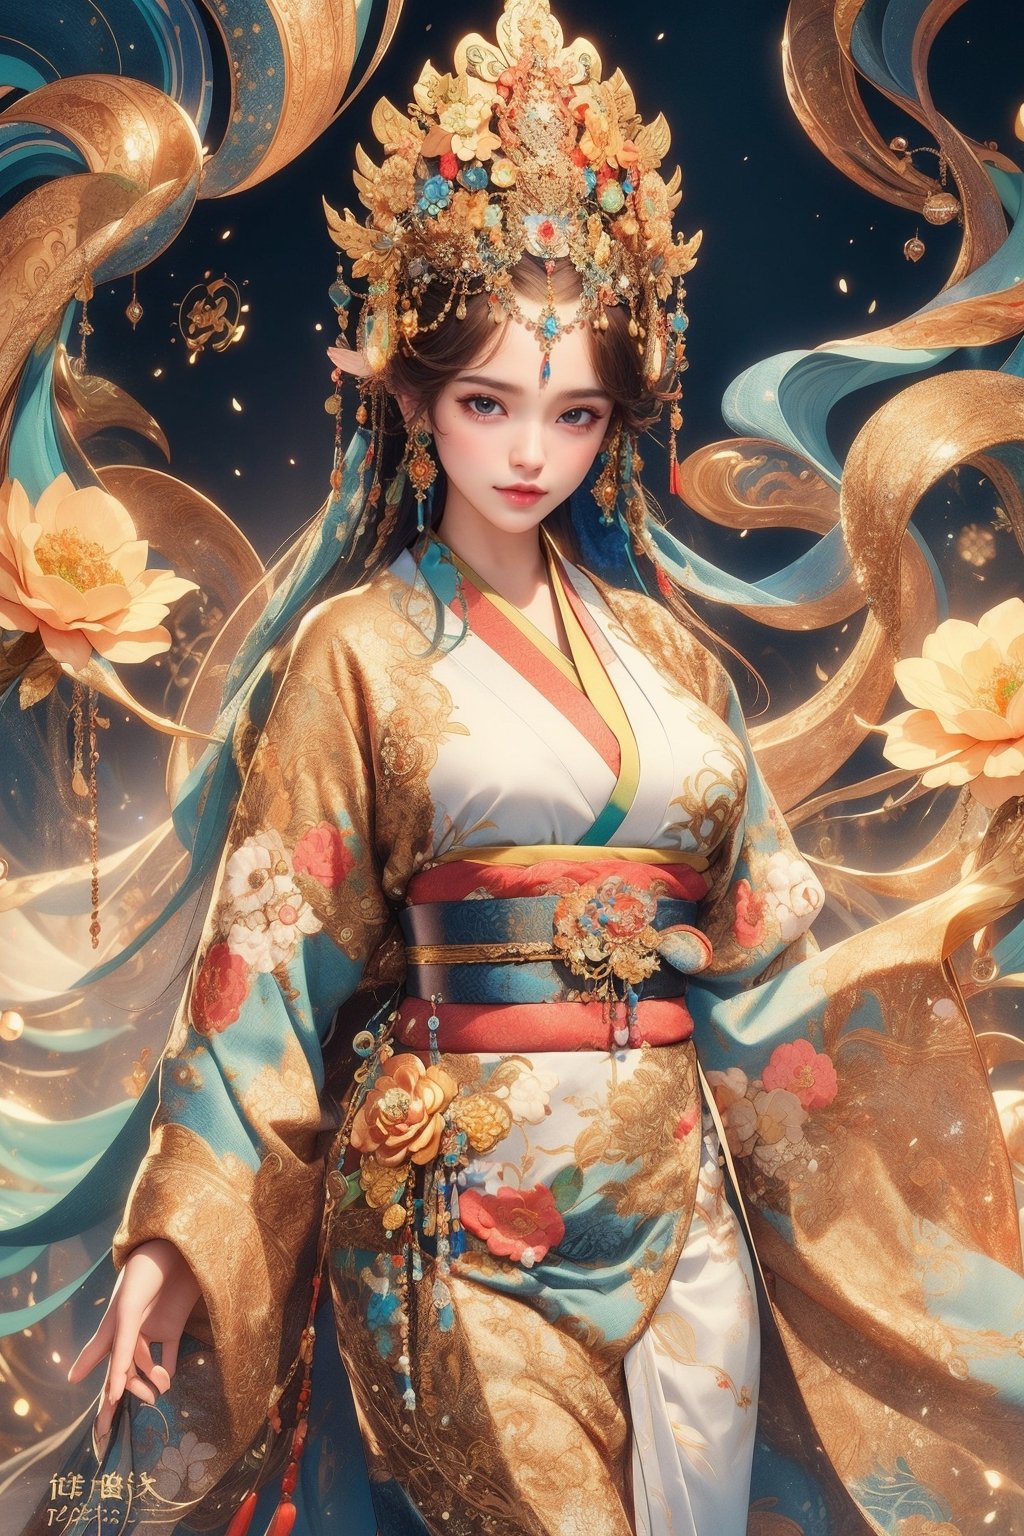 busty and sexy girl, 8k, masterpiece, ultra-realistic, best quality, high resolution, high definition, The figure wears an FLOWER headdress adorned with gold accents and pearls. LOW-CUT, FLOWER PATTERN KIMONO. Gold embroidery and gemstones create a sense of luxury. The fabric drapes elegantly, suggesting a flowing robe or gown. The overall color palette—rich golds and glowing whites. COLORFUL SMOKE BACKGROUND.,ELIGHT